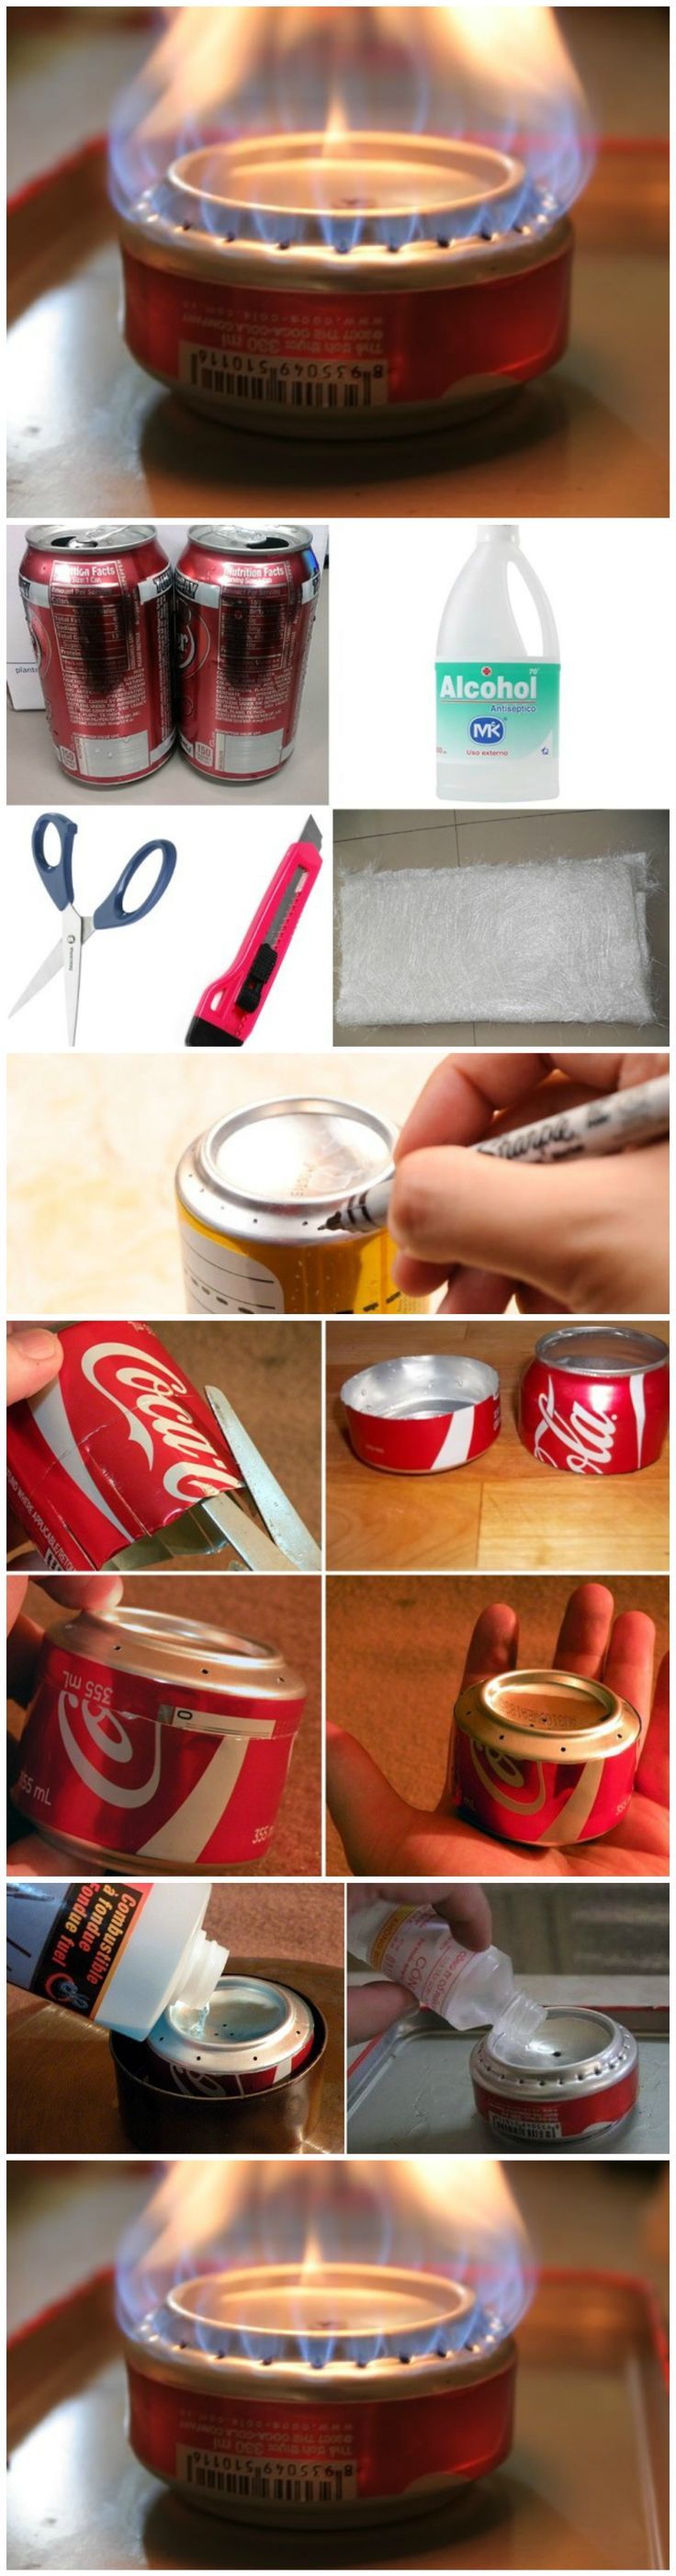 How To Build a Coke Can Stove for Hiking and Camping